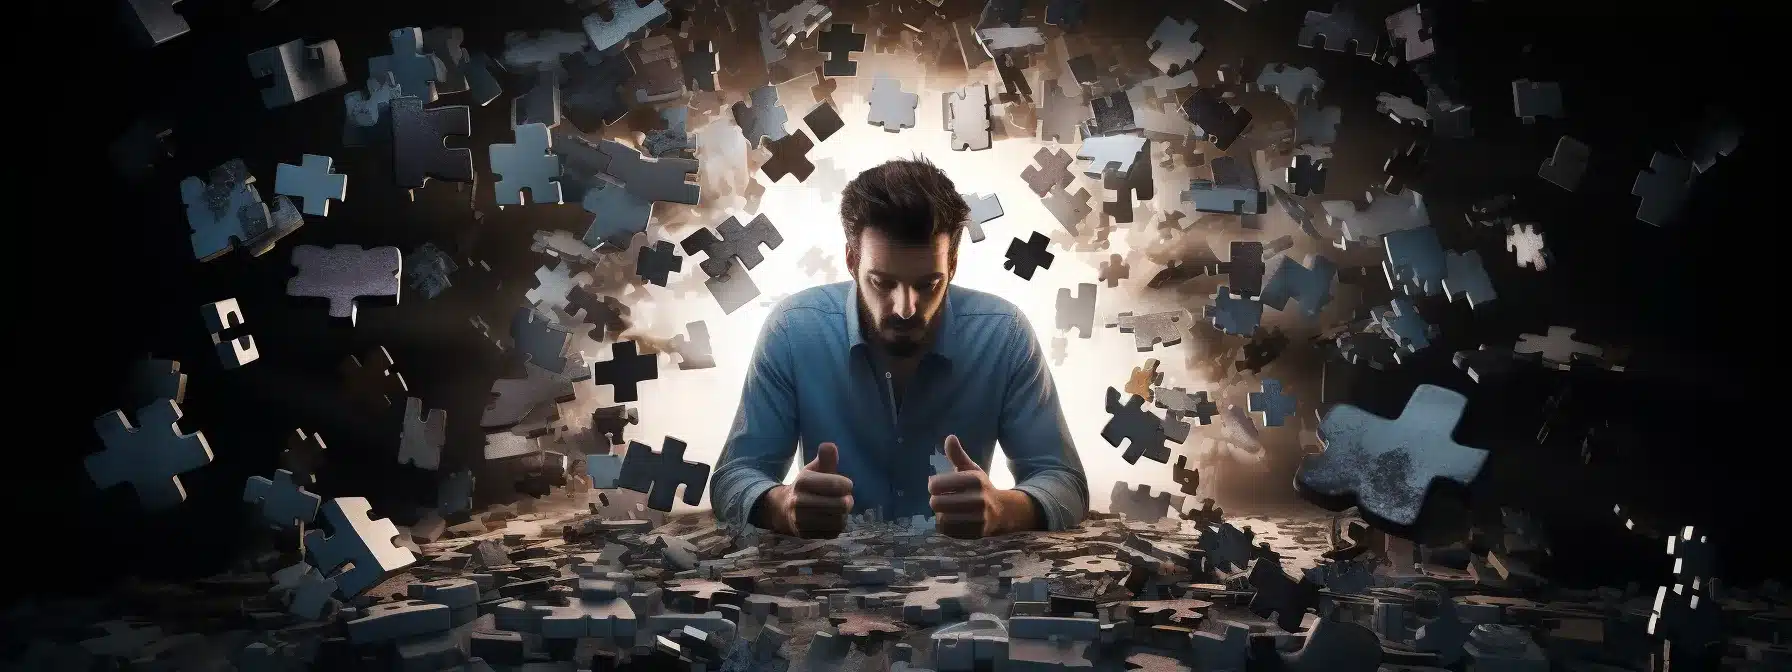 A Content Creator Surrounded By A Chaotic Puzzle Of Mismatched Puzzle Pieces.